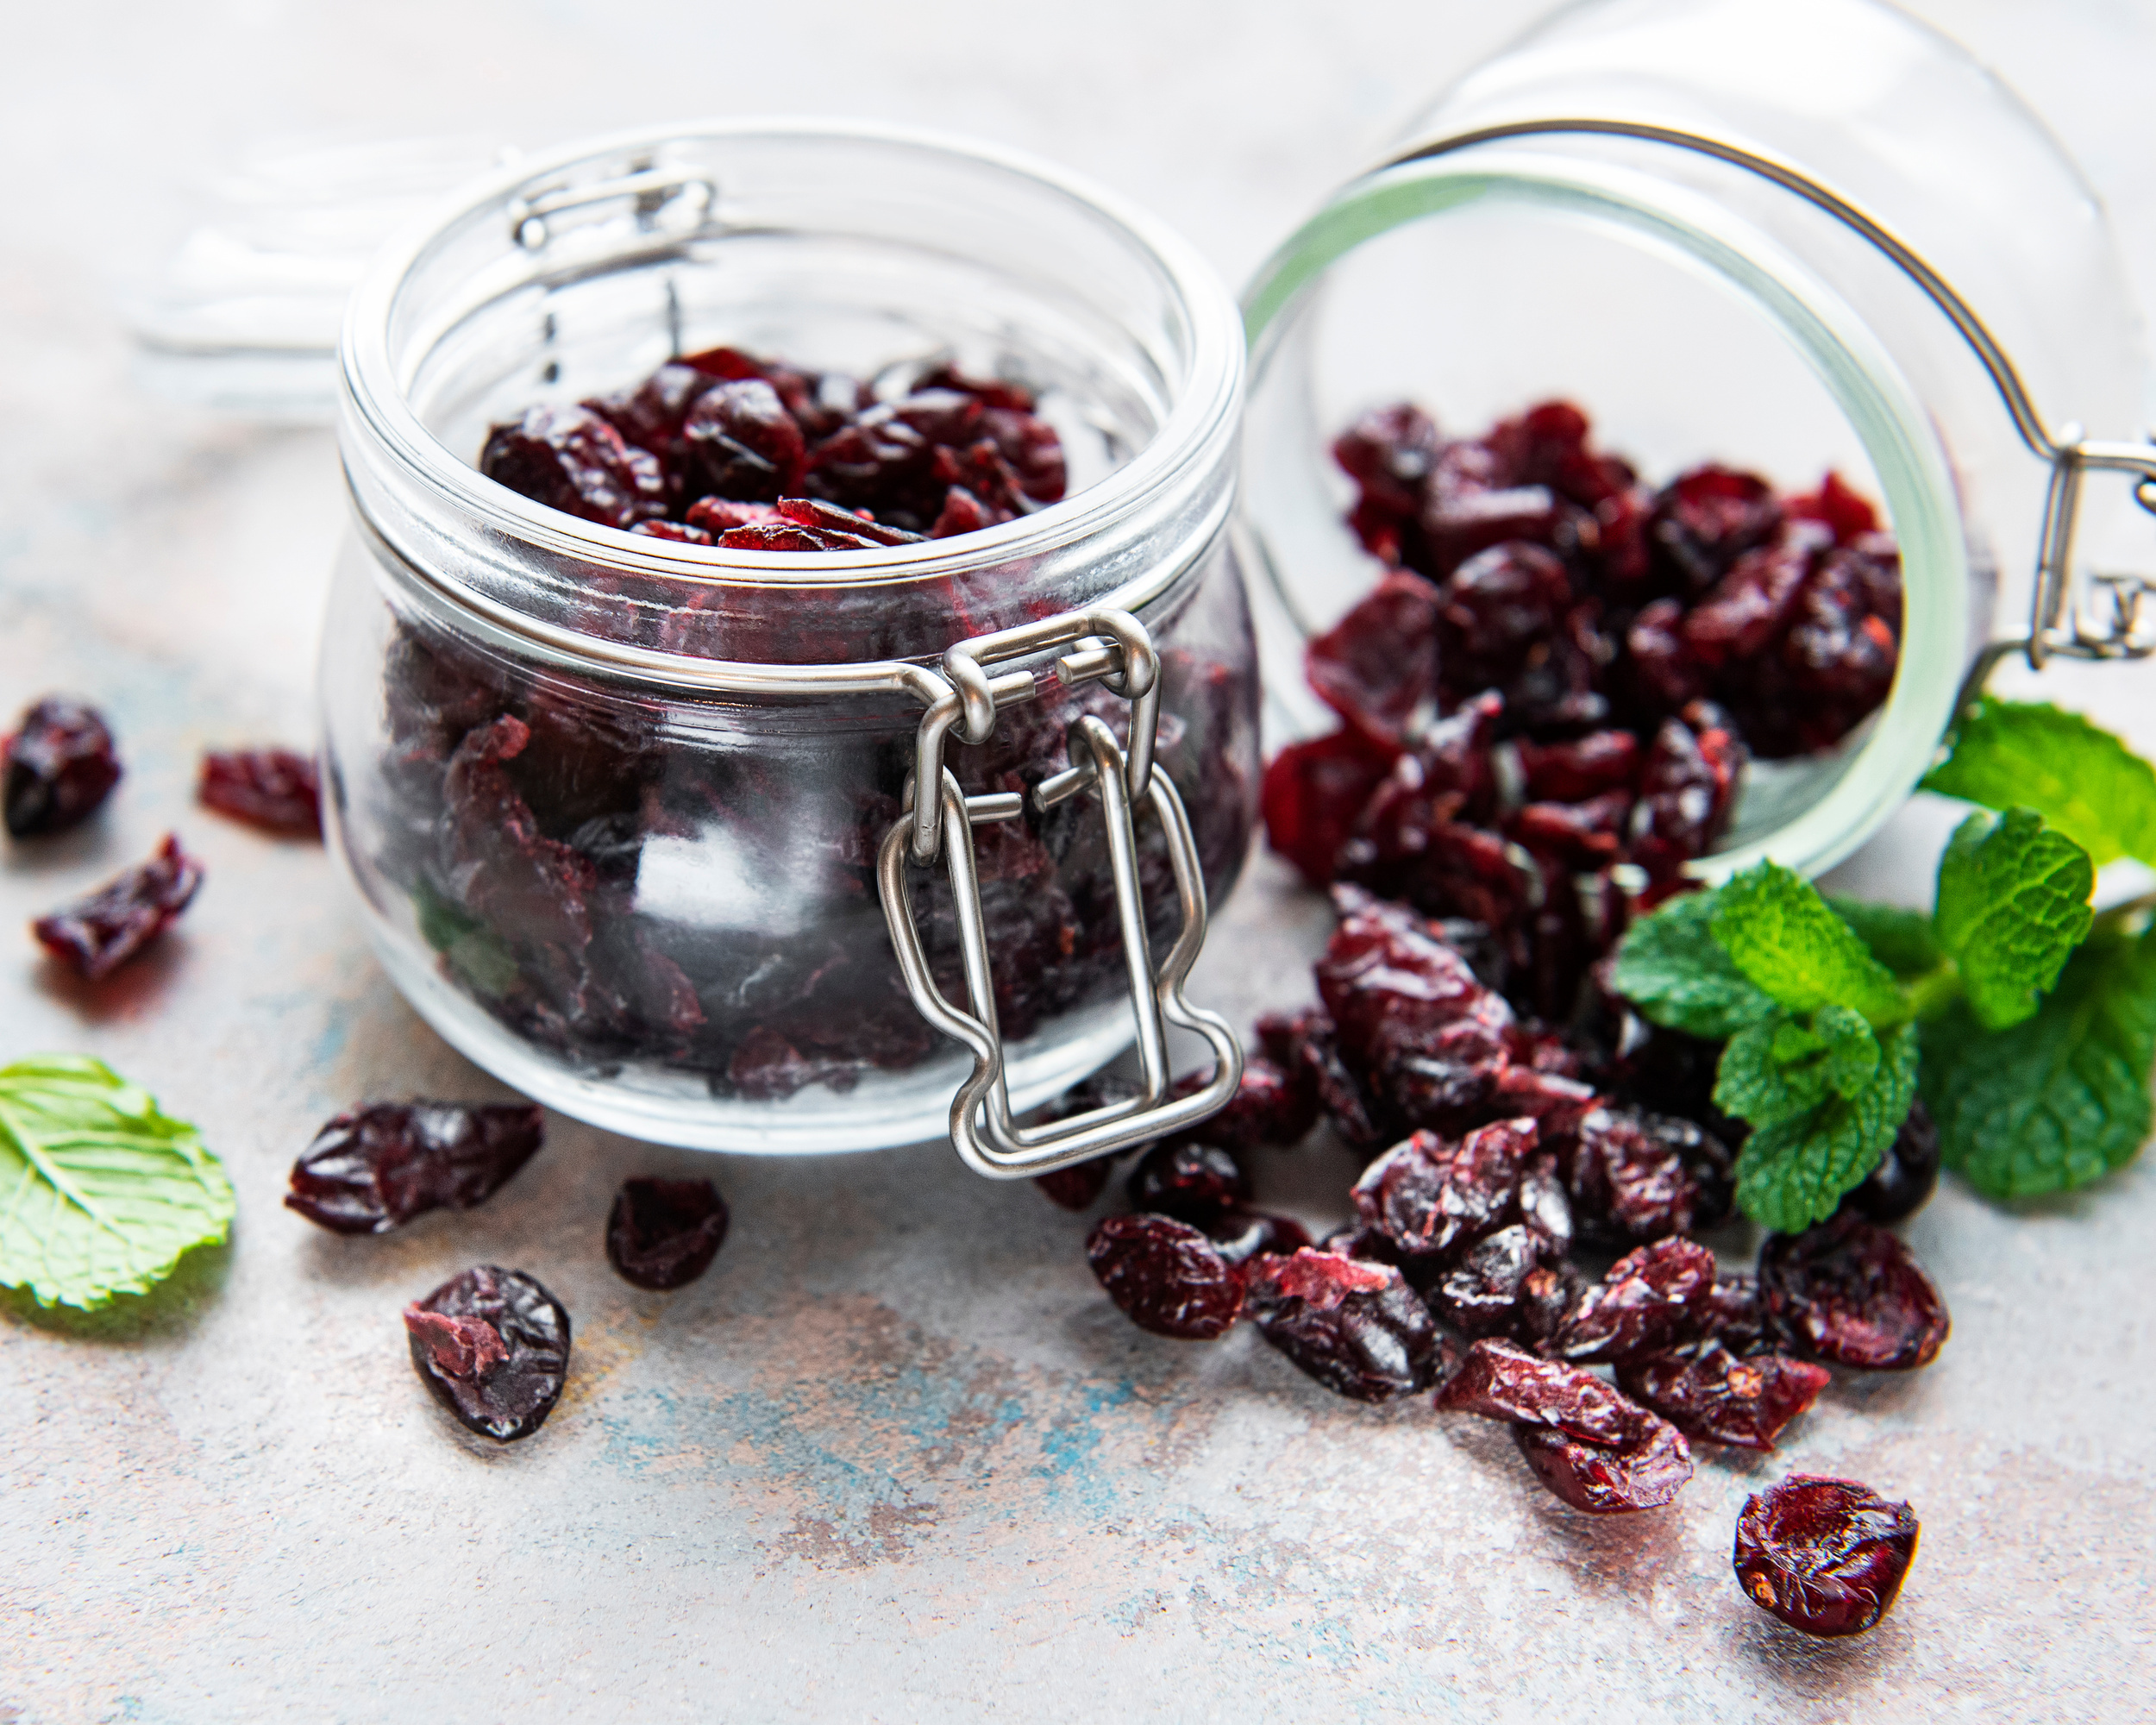 <p>“Dried cherries” is a bit of a misnomer because even in dried form, cherries burst with juicy tartness. They’re like fruit snacks, but with less added sugar, no artificial dyes, and, you know, they’re actually fruit. </p><p><a href='https://www.msn.com/en-us/community/channel/vid-cj9pqbr0vn9in2b6ddcd8sfgpfq6x6utp44fssrv6mc2gtybw0us'>Follow us on MSN to see more of our exclusive lifestyle content.</a></p>